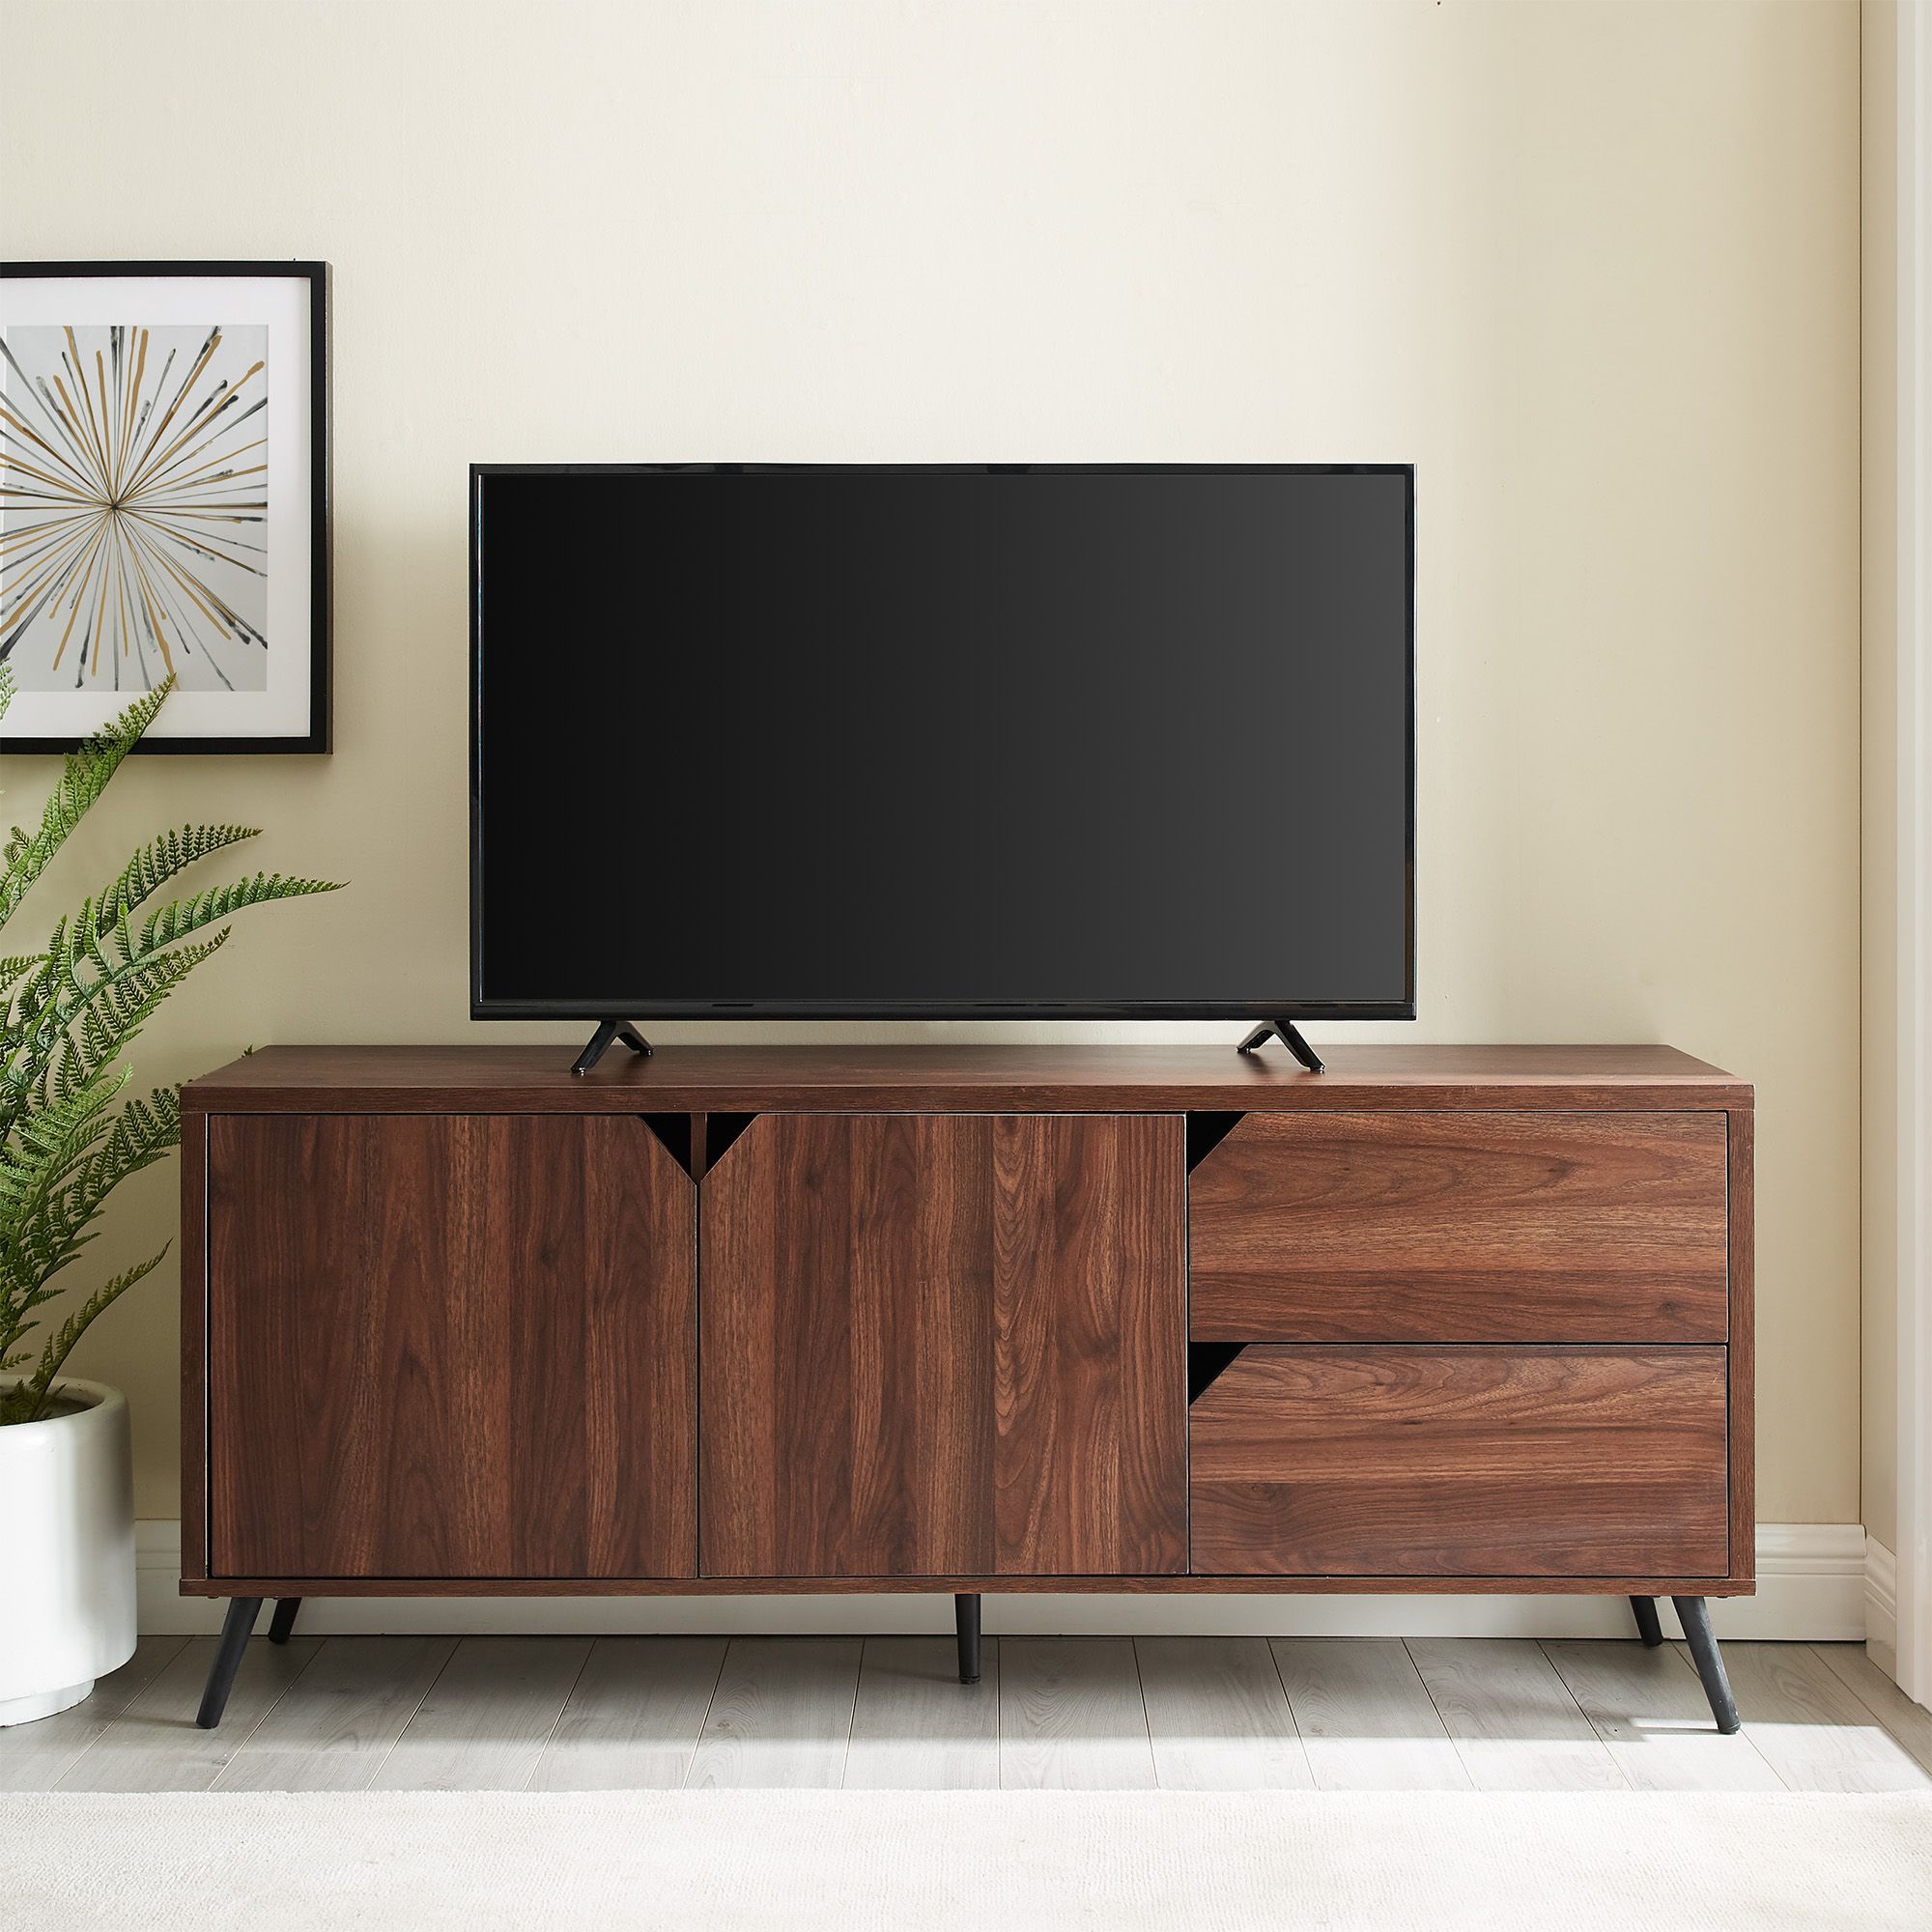 Home In 2020 | Tv Stand With Storage, Mid Century, Dark Walnut For Mid Century 2 Door Tv Stands In Dark Walnut (View 12 of 20)